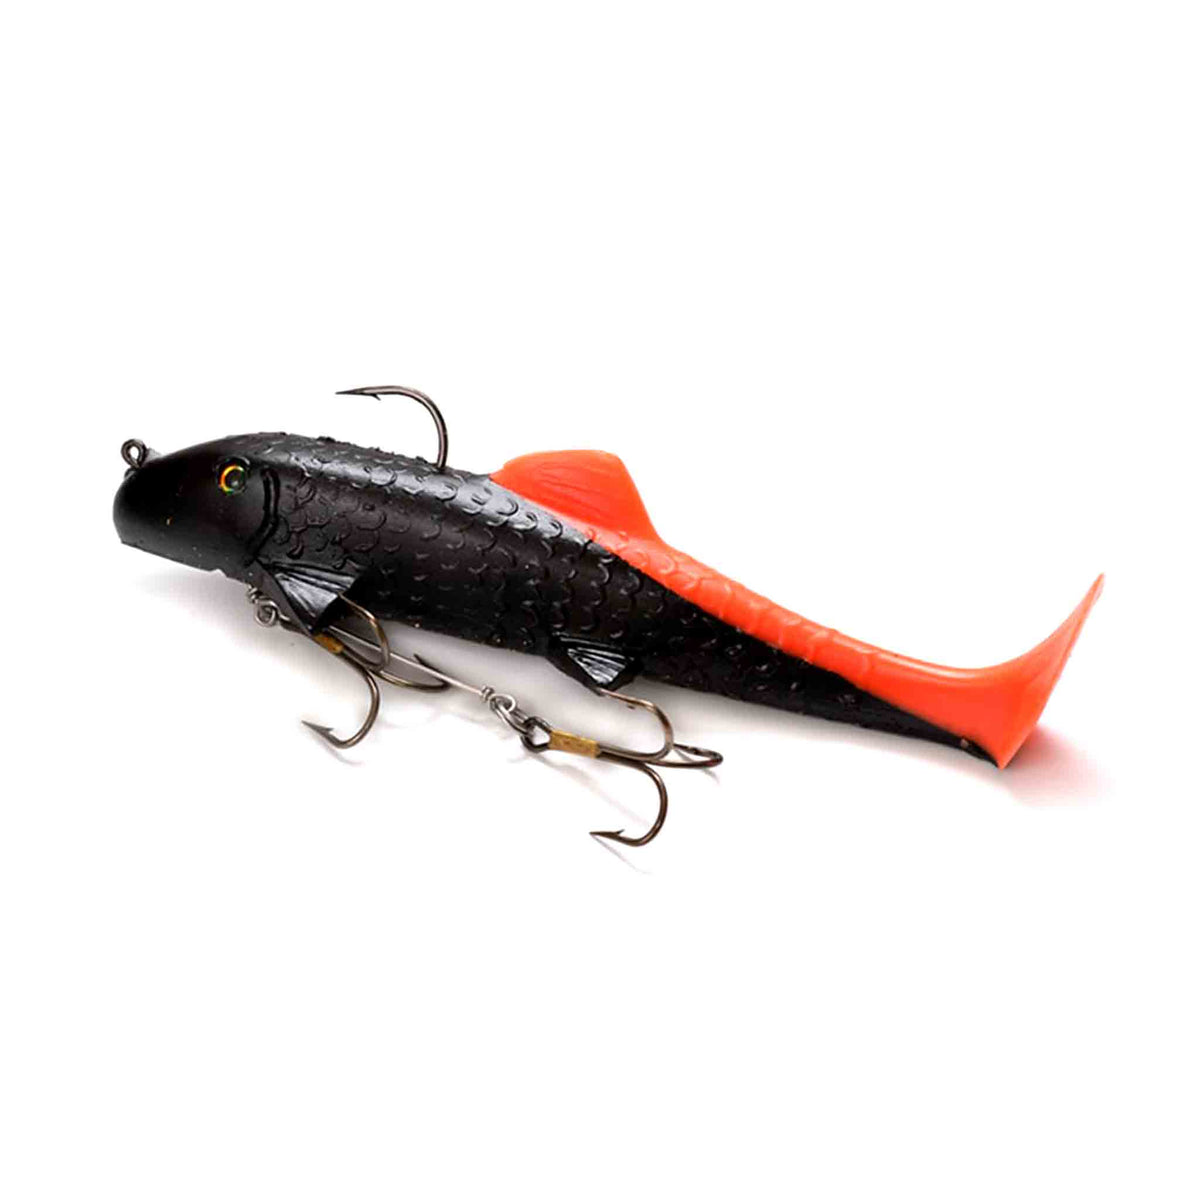 View of Rubber Suick Suzy Sucker 9" Swimbait Black Orange Tail available at EZOKO Pike and Musky Shop